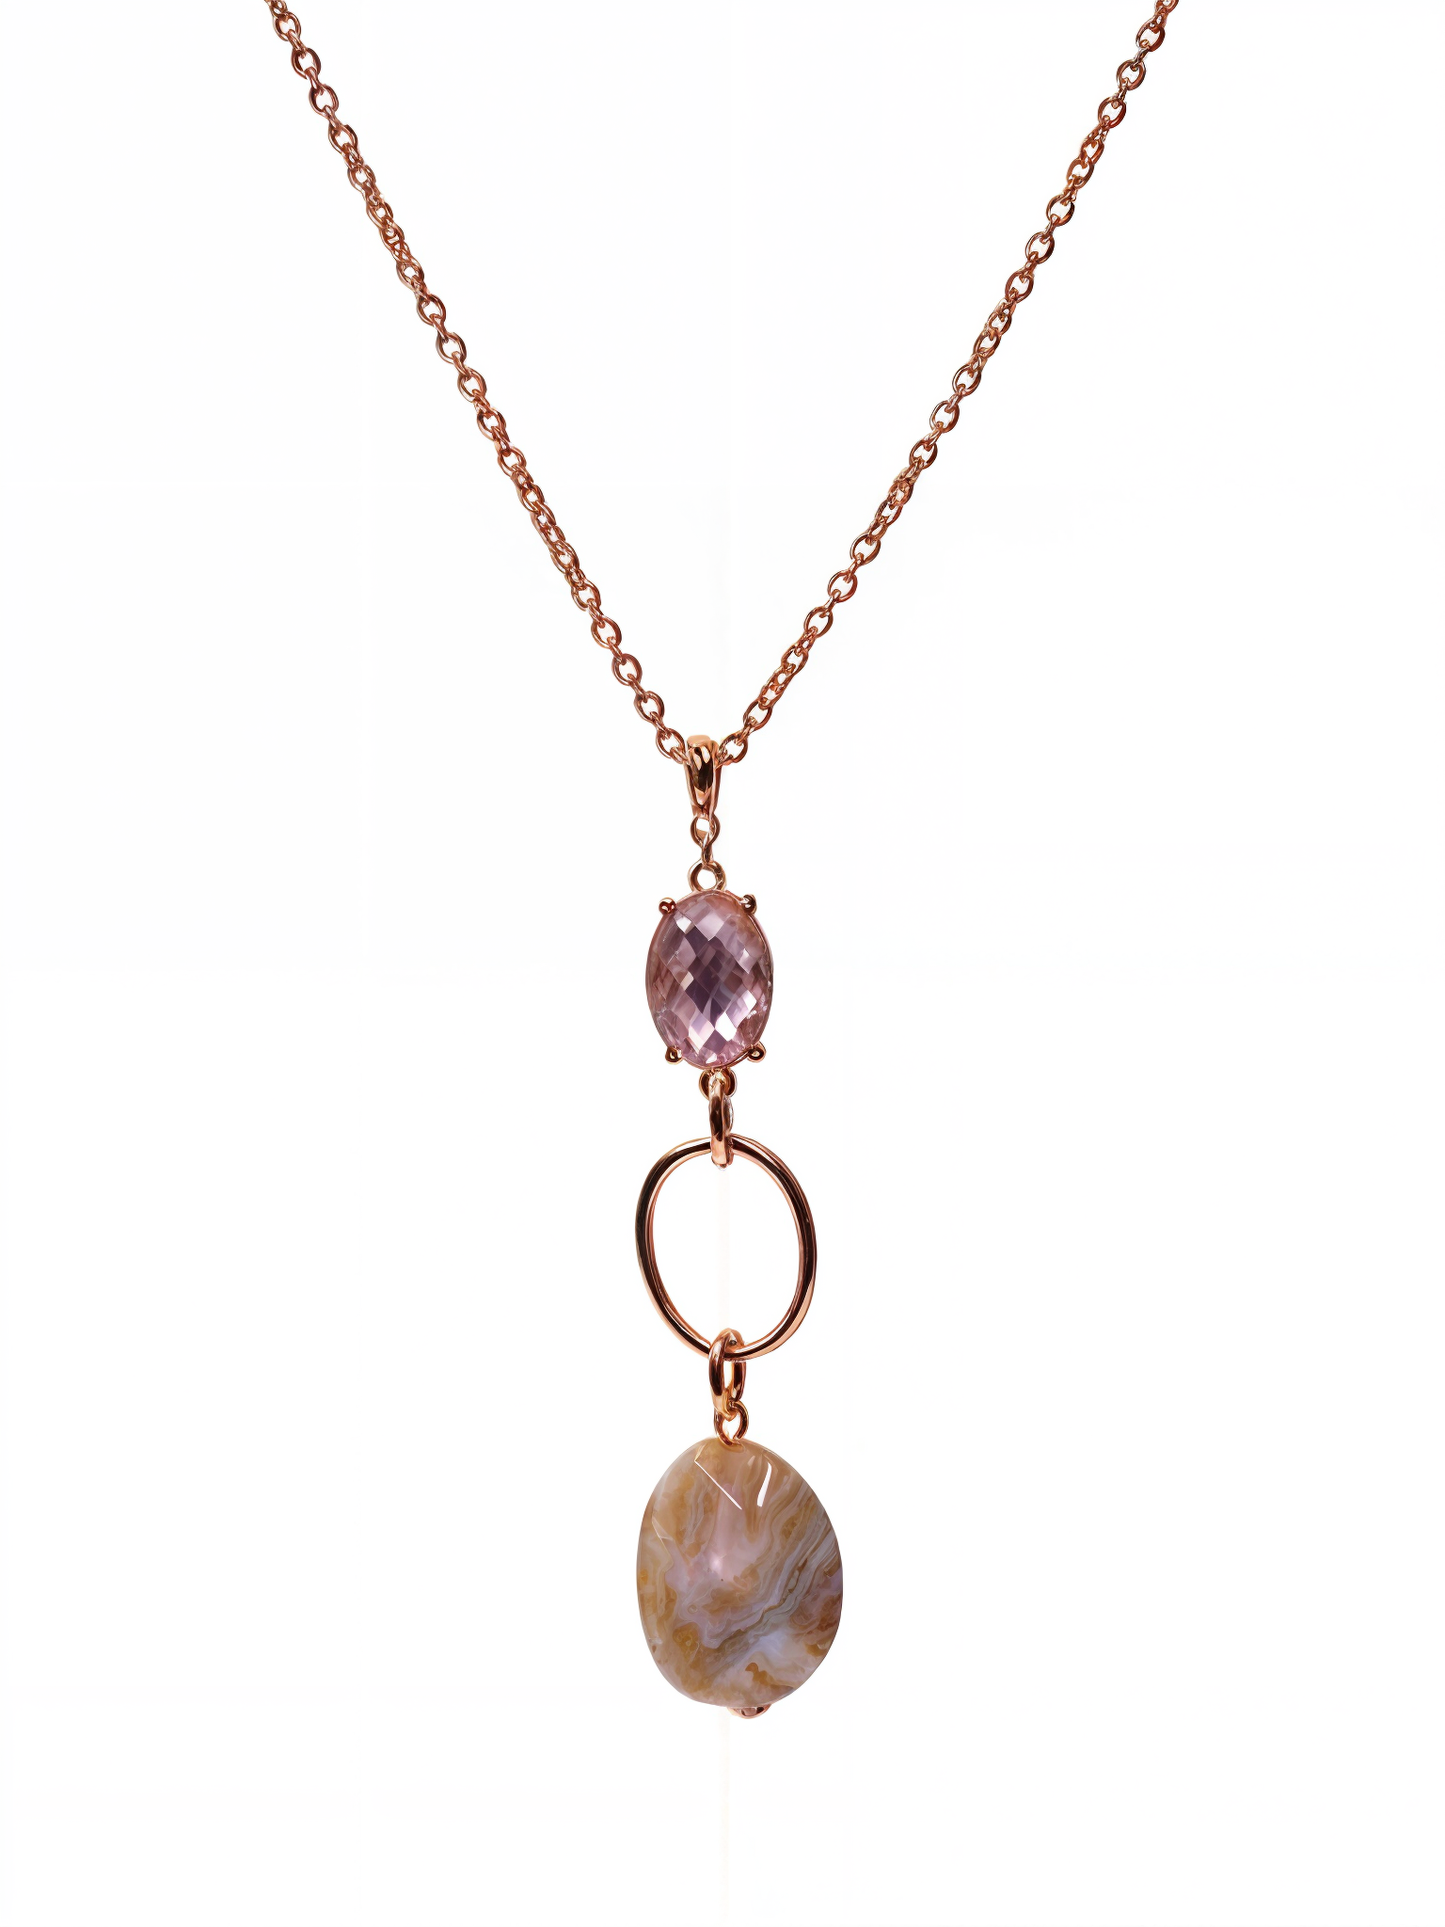 Golden Plated Crystal Stone Long Chain Pendant with Pebble Stone